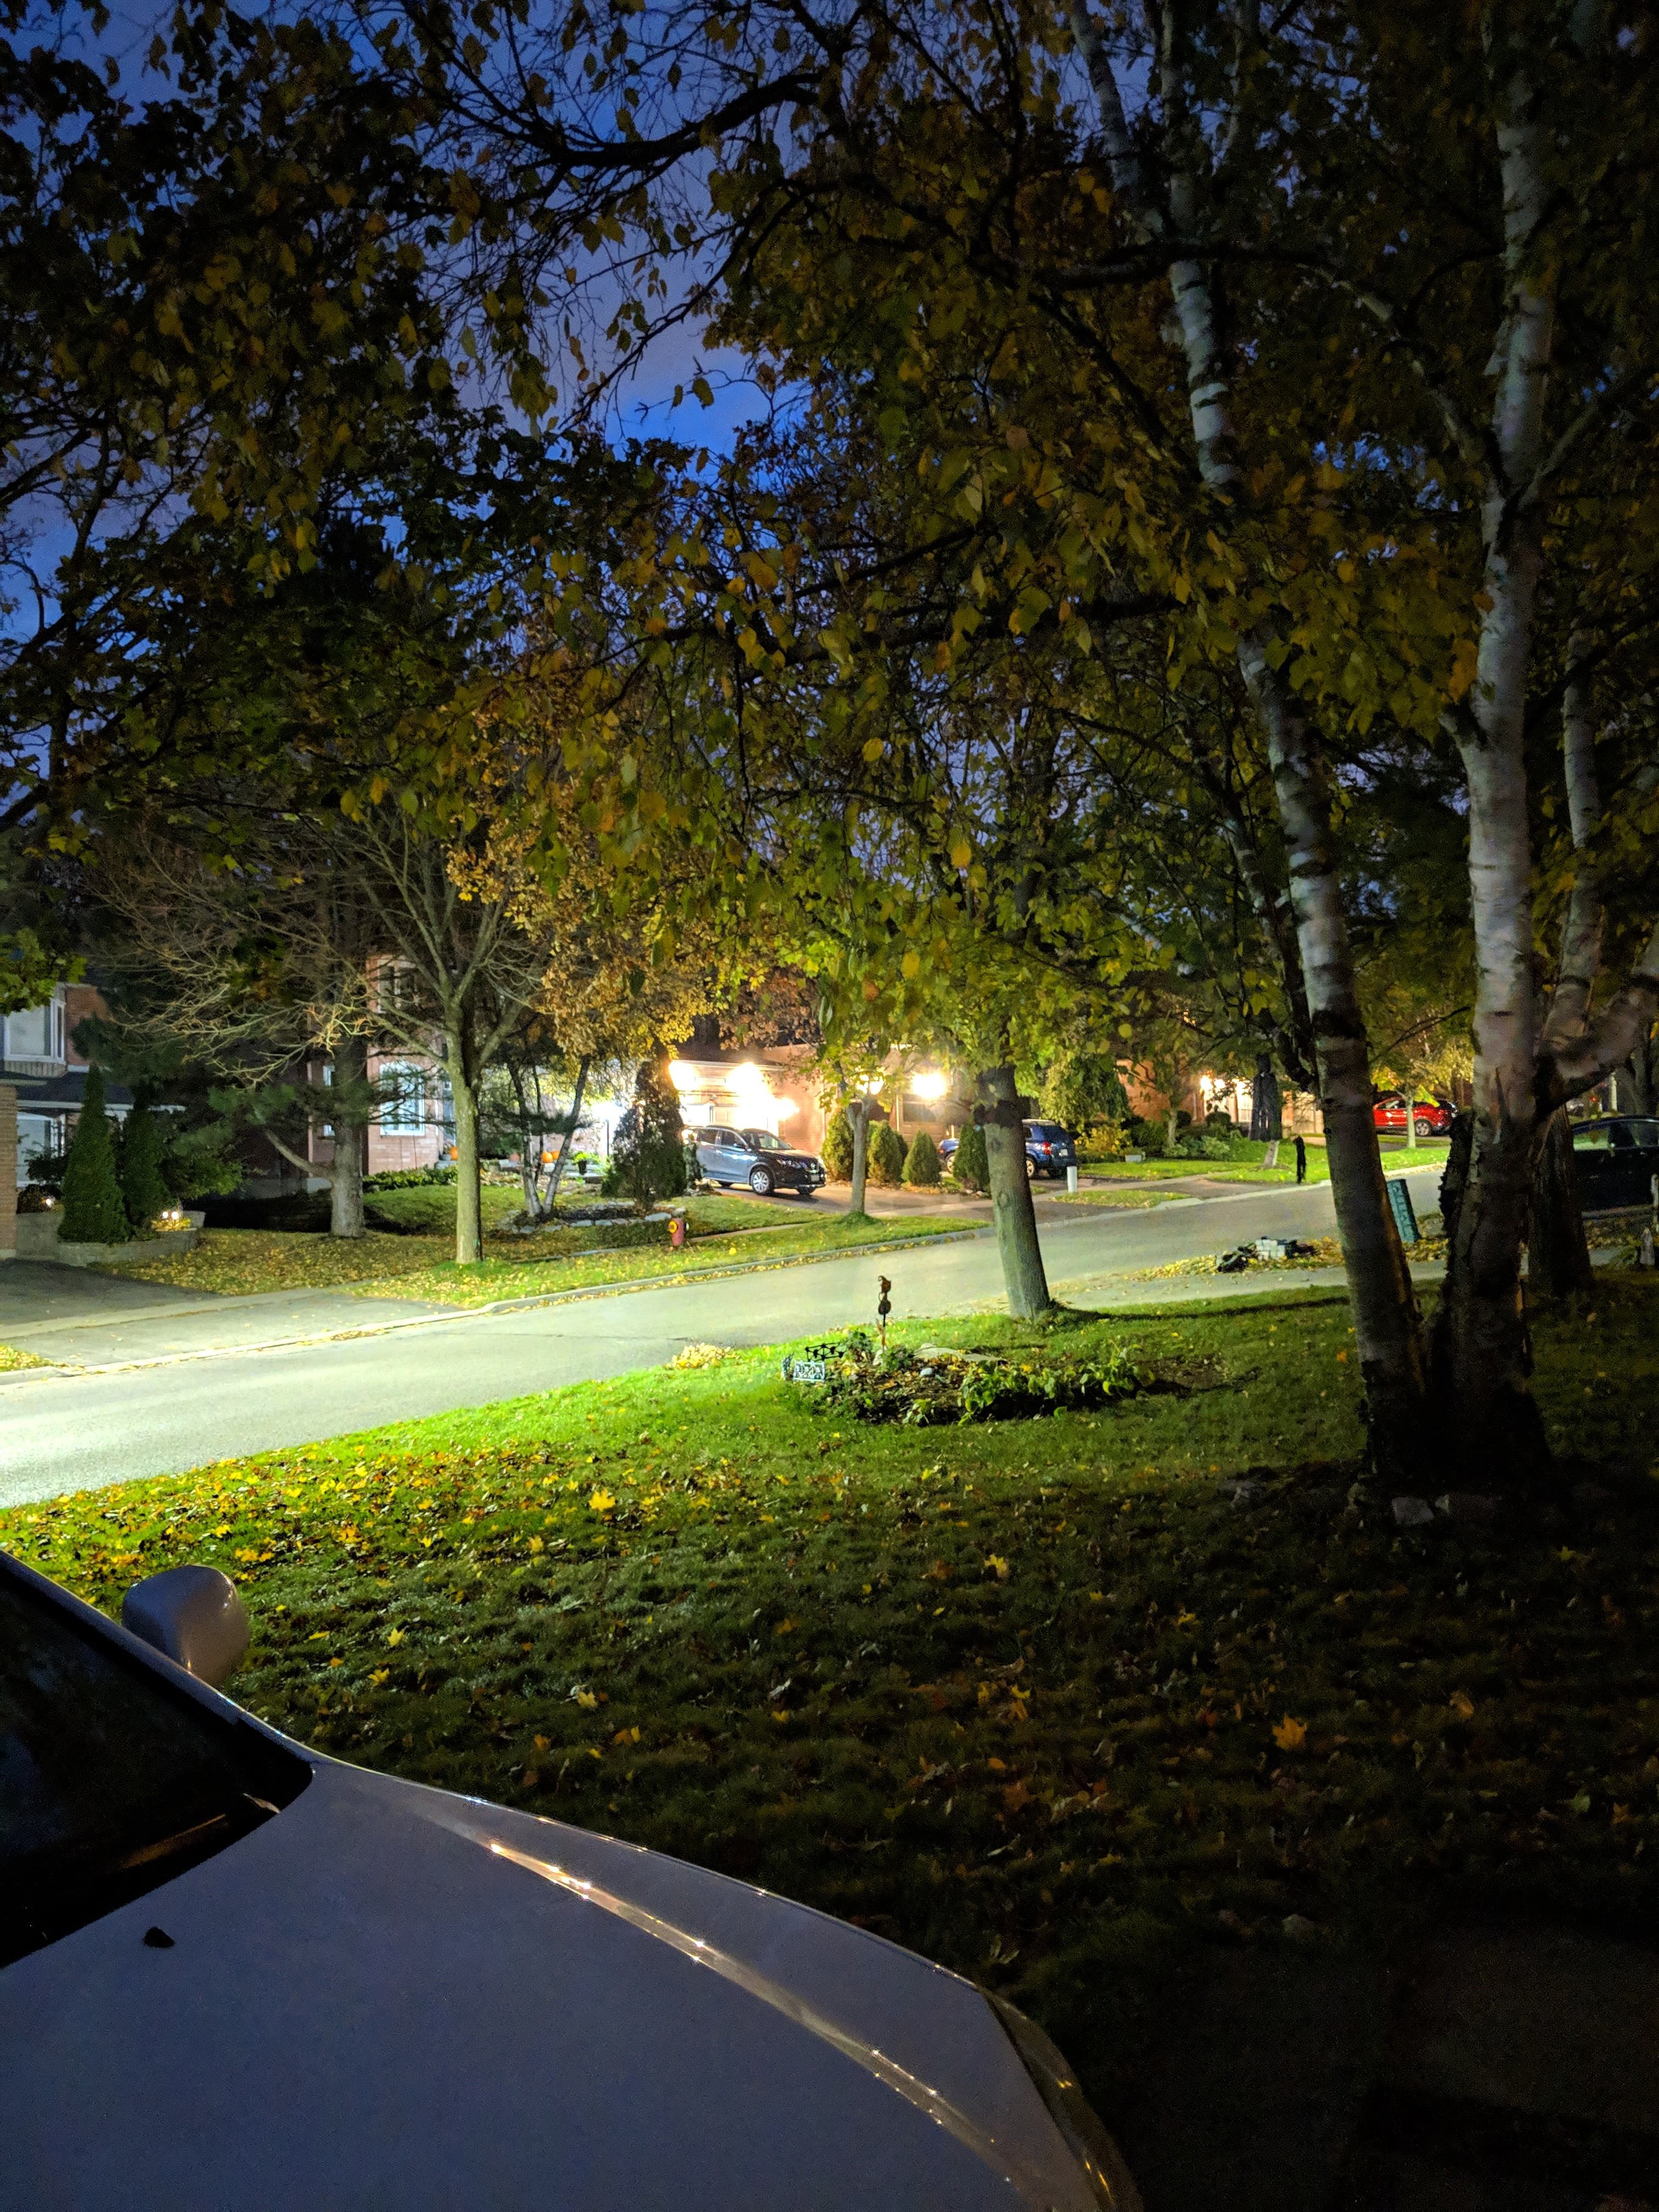 Download Google Camera With Night Sight On Any Google Pixel , Pixel 2 & Pixel 3